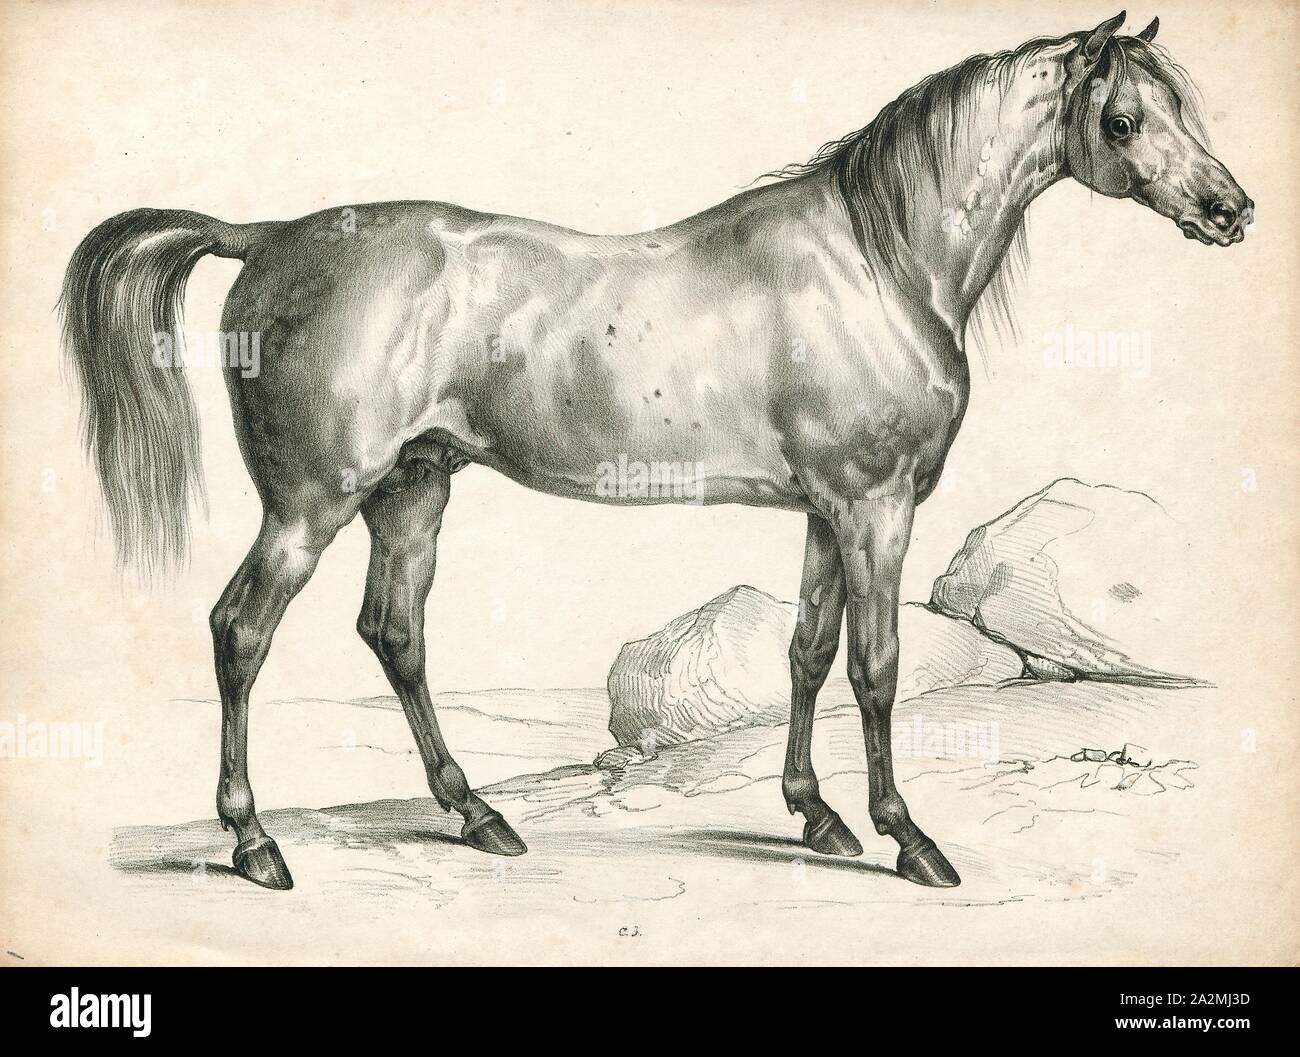 Equus caballus, Print, The horse (Equus ferus caballus) is one of two extant subspecies of Equus ferus. It is an odd-toed ungulate mammal belonging to the taxonomic family Equidae. The horse has evolved over the past 45 to 55 million years from a small multi-toed creature, Eohippus, into the large, single-toed animal of today. Humans began domesticating horses around 4000 BC, and their domestication is believed to have been widespread by 3000 BC. Horses in the subspecies caballus are domesticated, although some domesticated populations live in the wild as feral horses. These feral populations Stock Photo